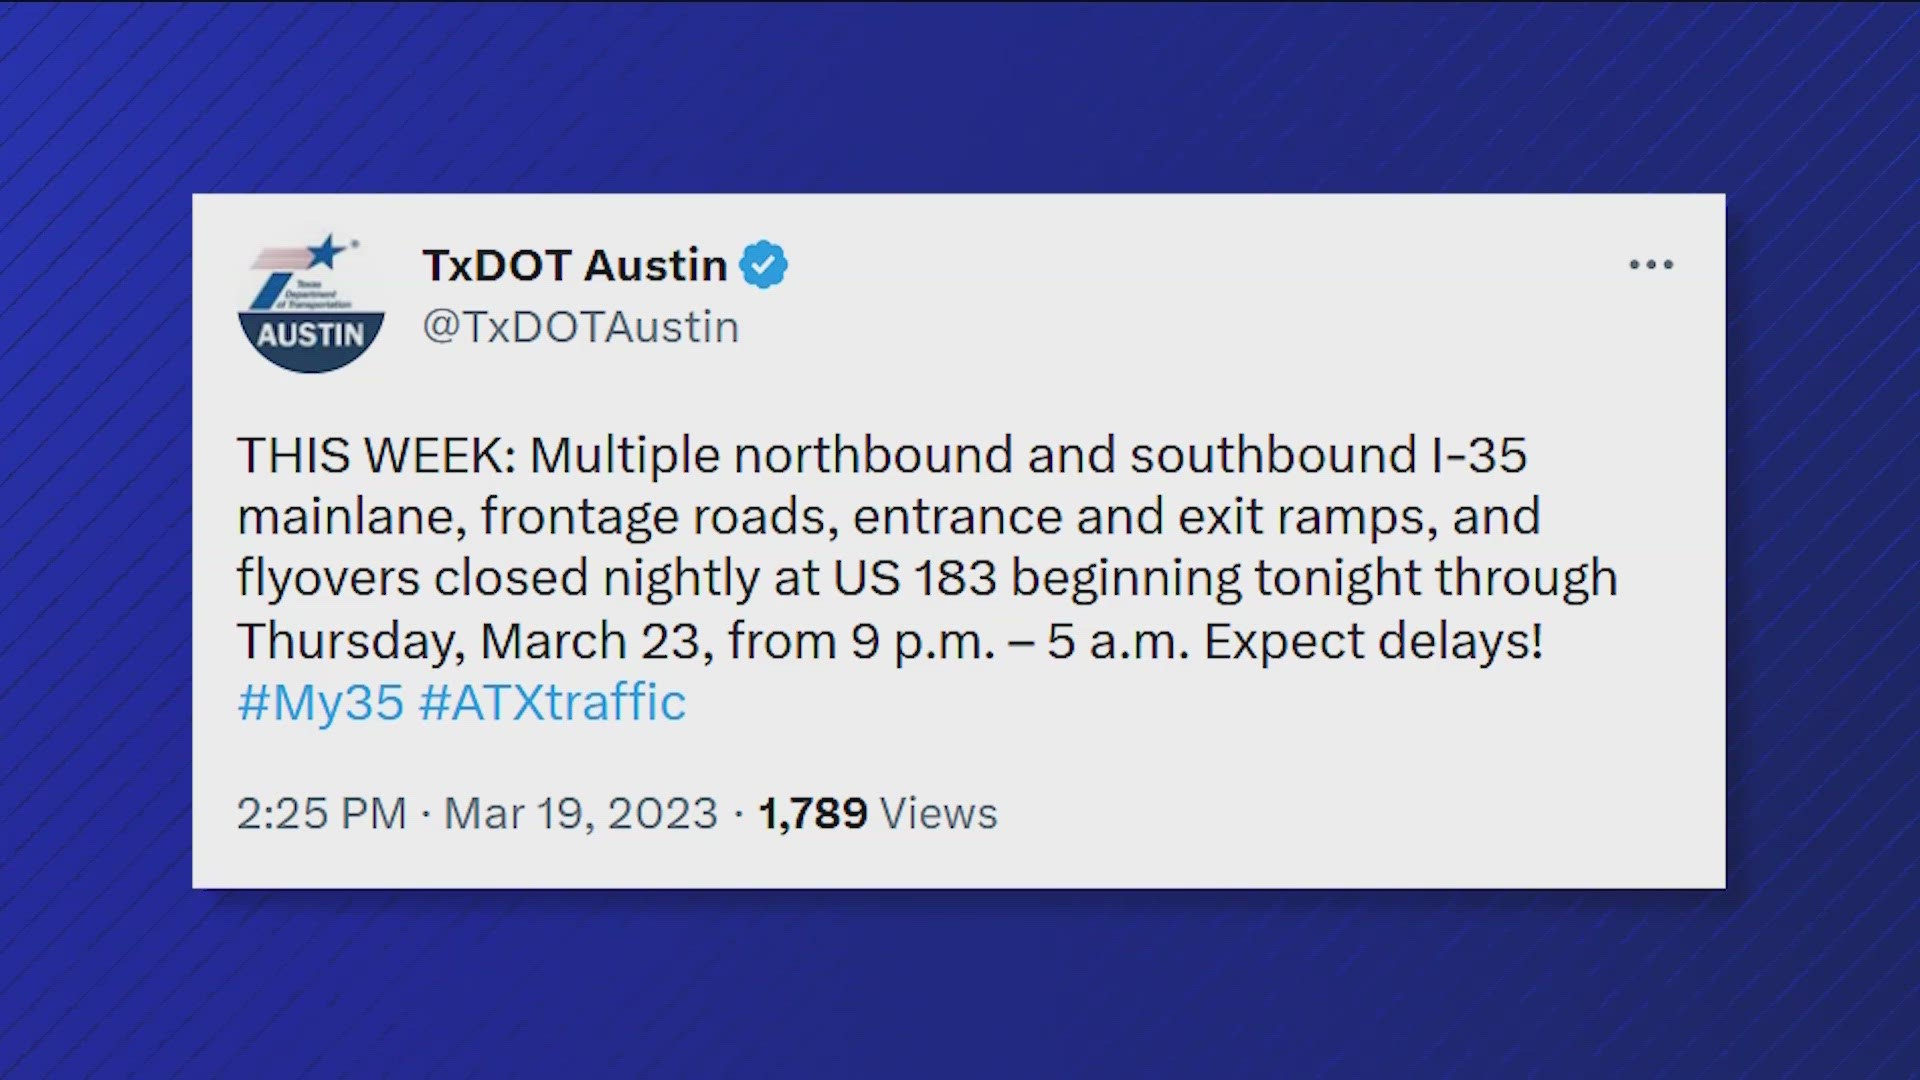 Parts of Interstate 35 will be closed at US 183 nightly from 9 p.m. to 5 a.m. until Thursday.